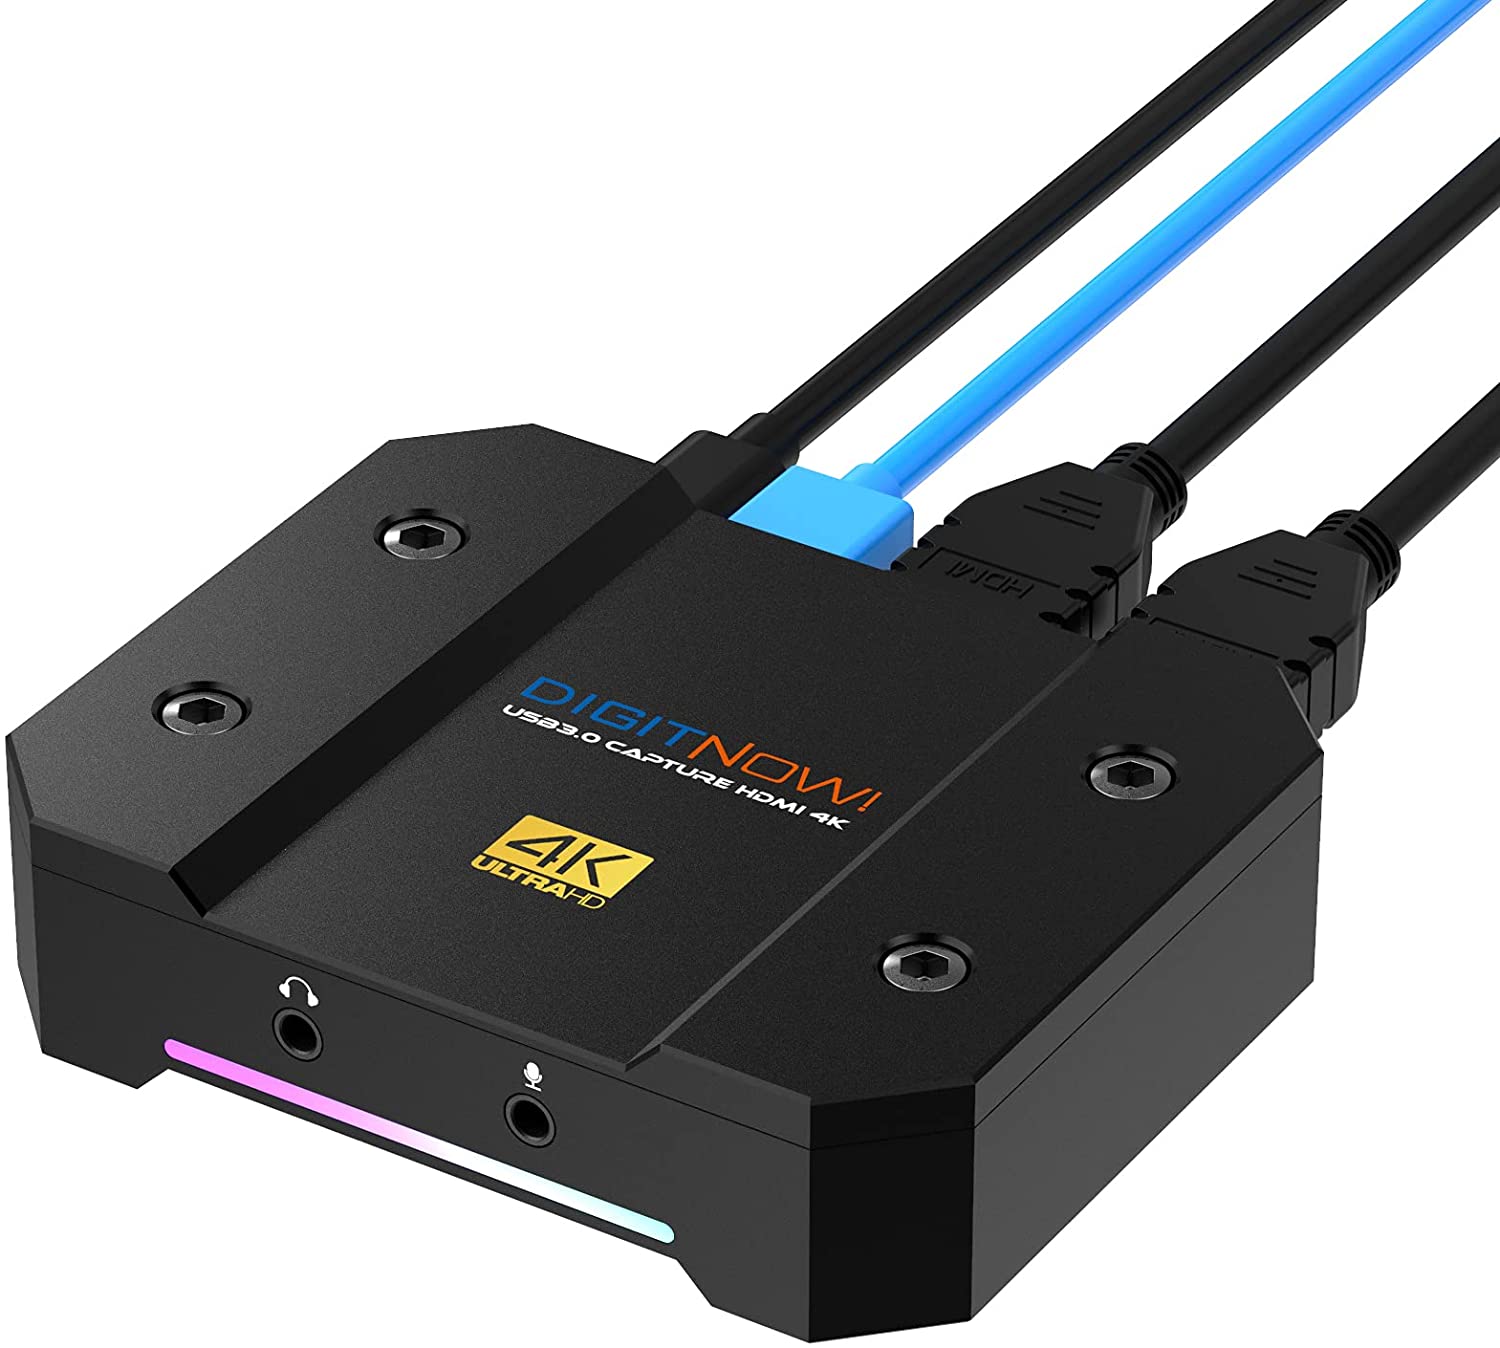 DigitNow Internal Capture Card, PCIe Capture Card, Stream and Record in  4K60